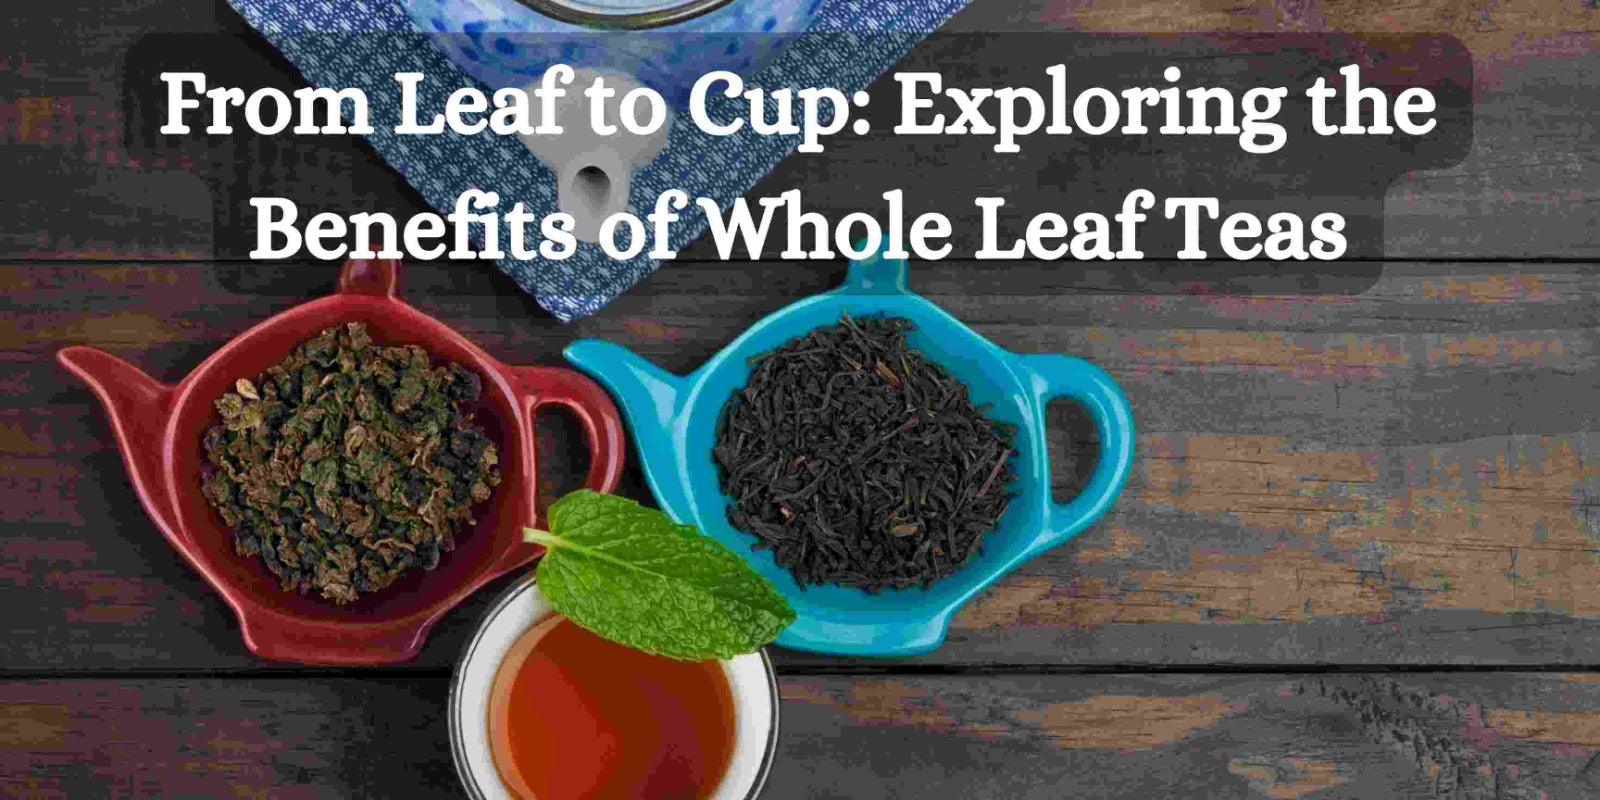 From Leaf to Cup: Exploring the Benefits of Whole Leaf Teas